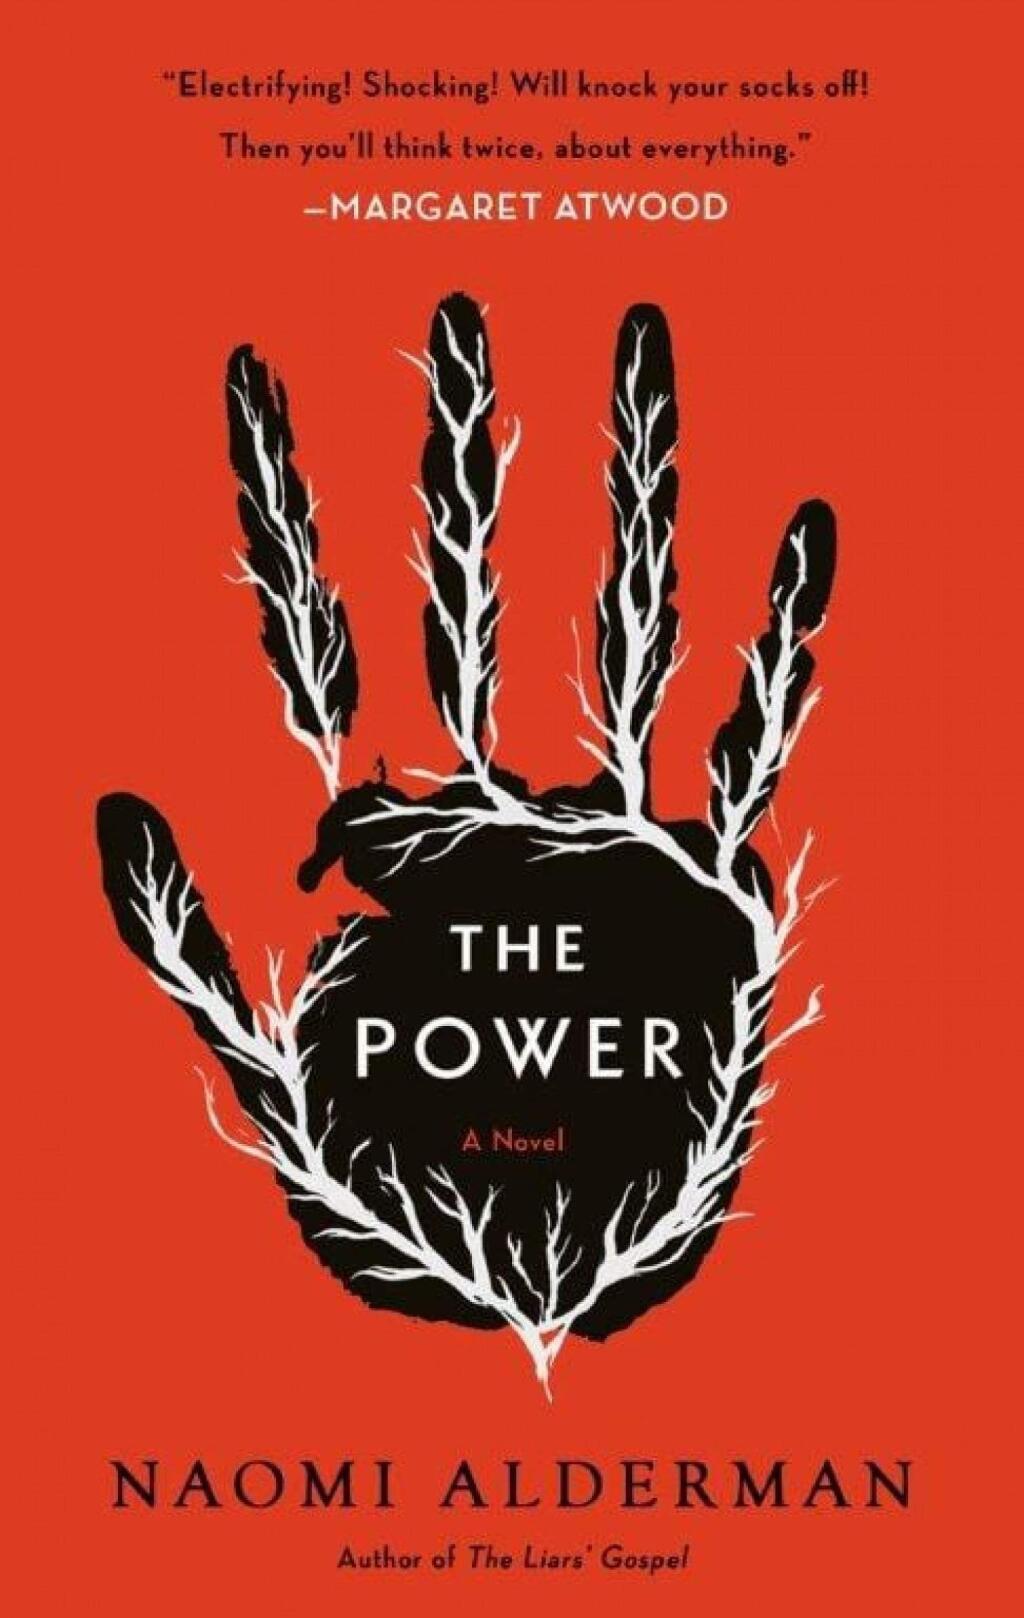 Naomi Anderson's 'The Power' strikes the Top 10 list this week, appearing in the Number 4 spot.